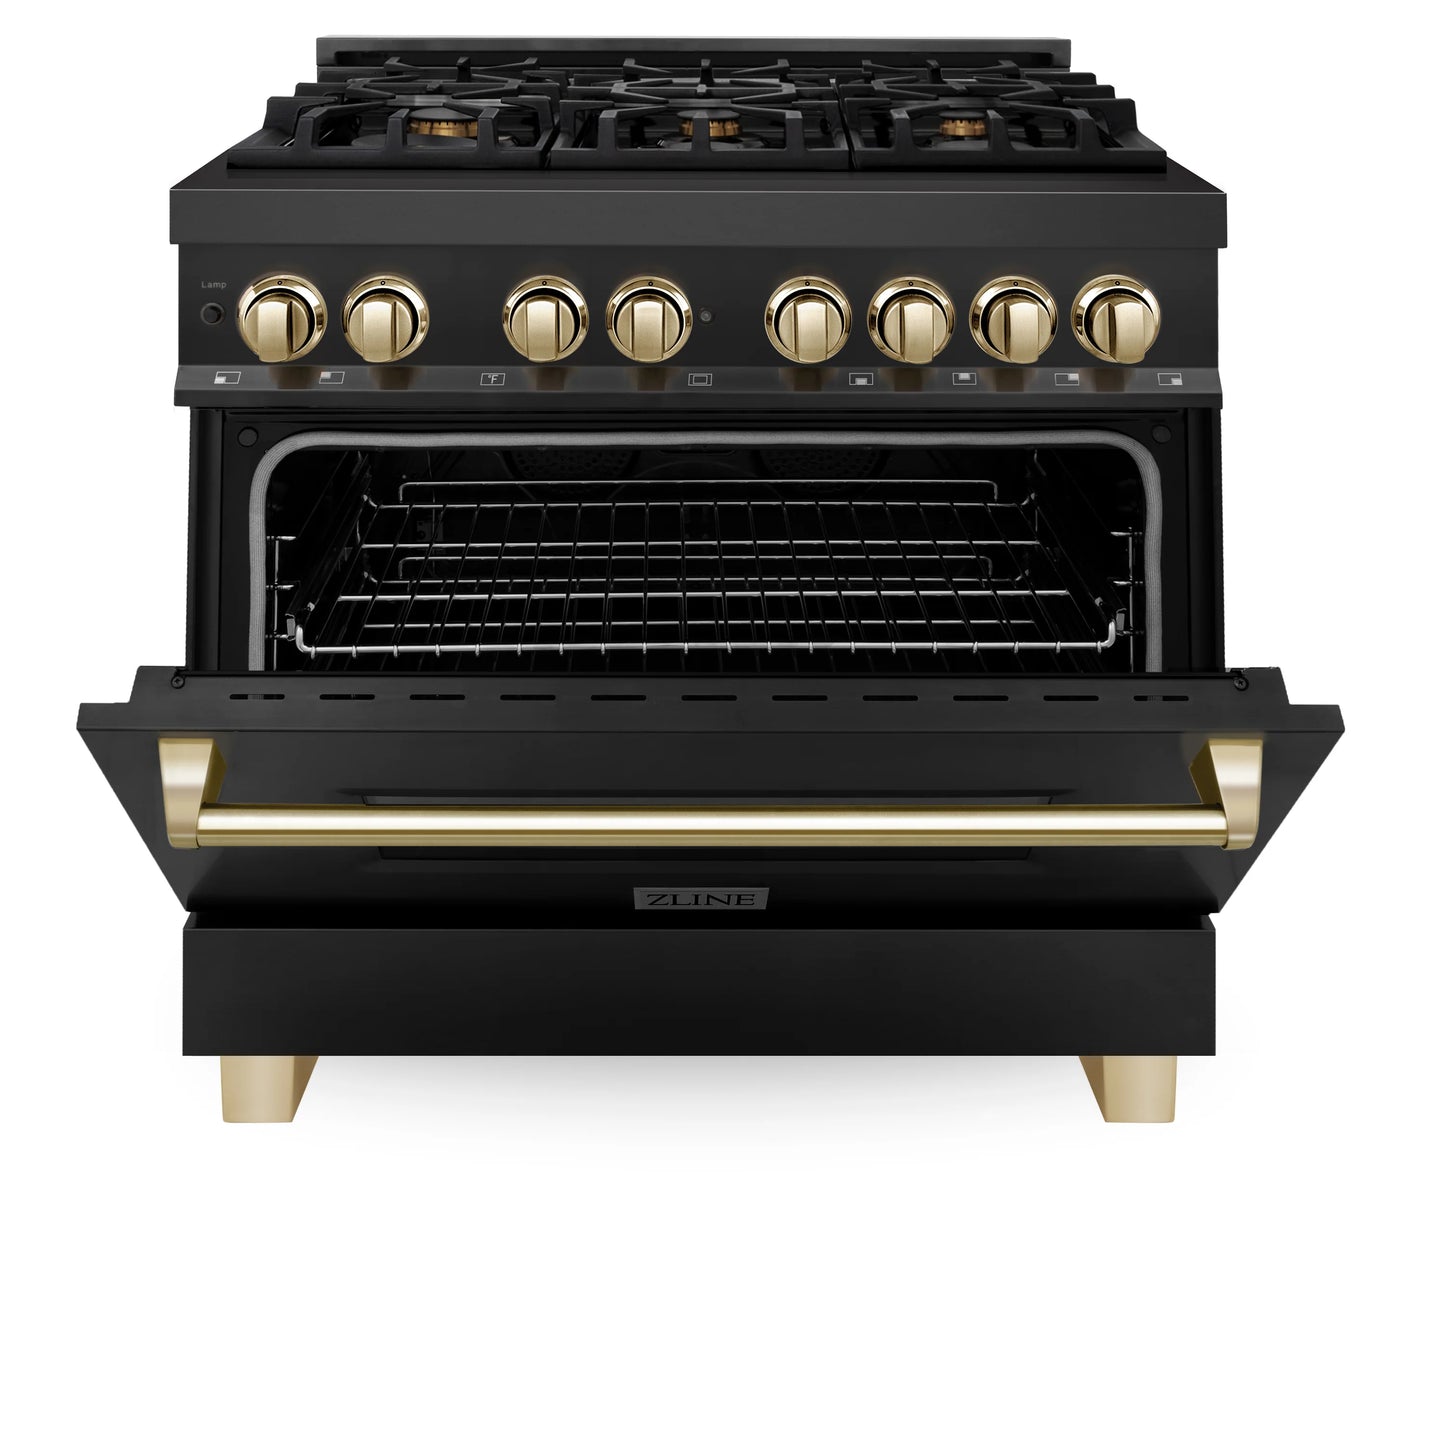 ZLINE Autograph Edition 36 in. Dual Fuel Range with Gas Stove and Electric Oven in Black Stainless Steel with Champagne Bronze Accents (RABZ-36-CB)